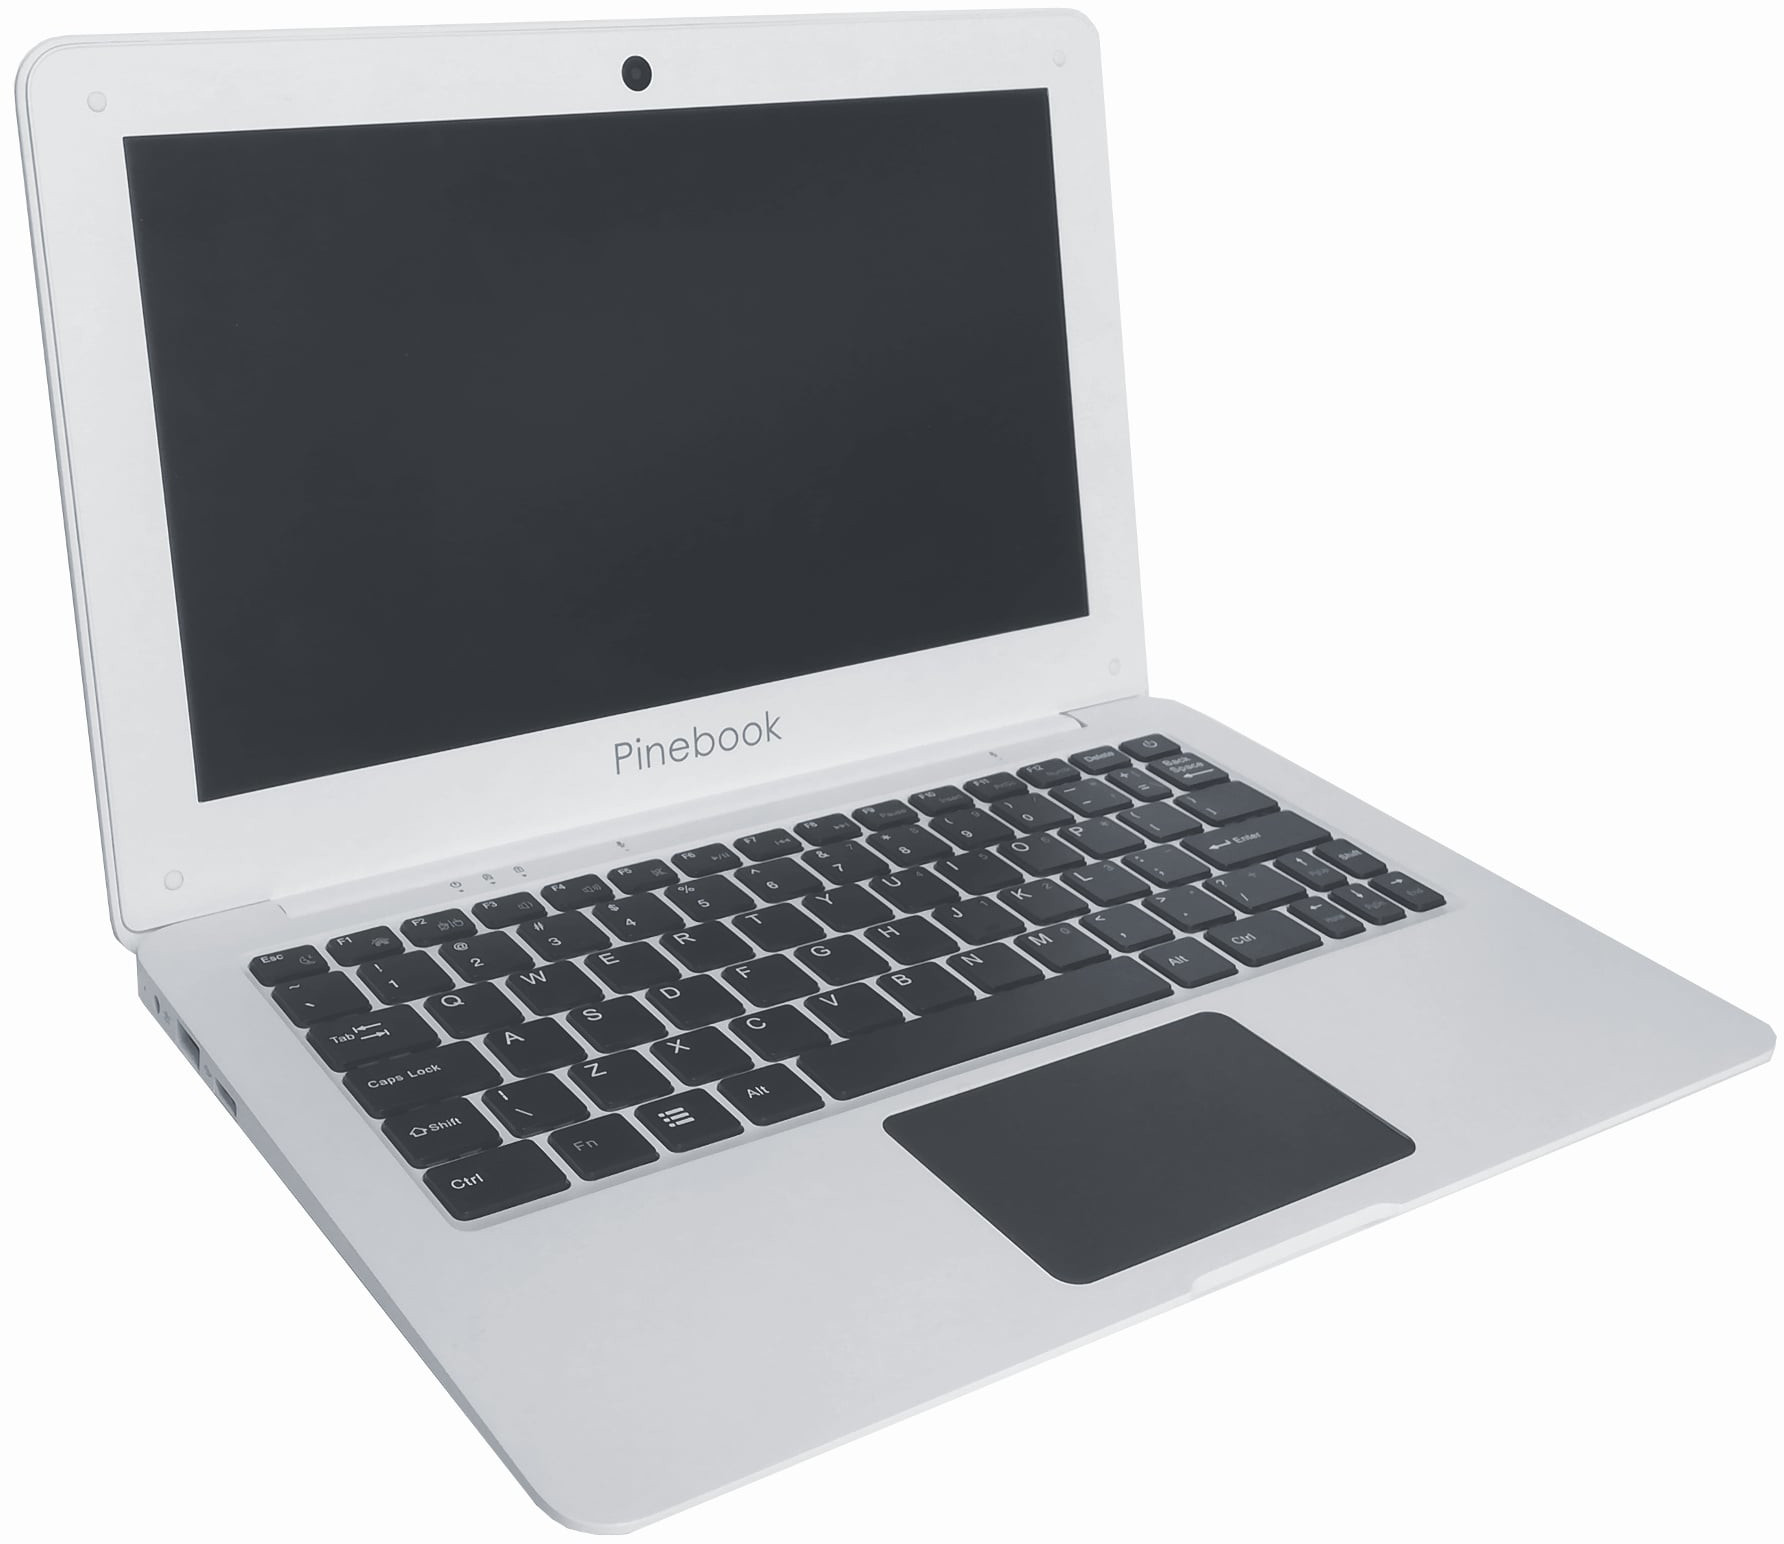 The Pinebook